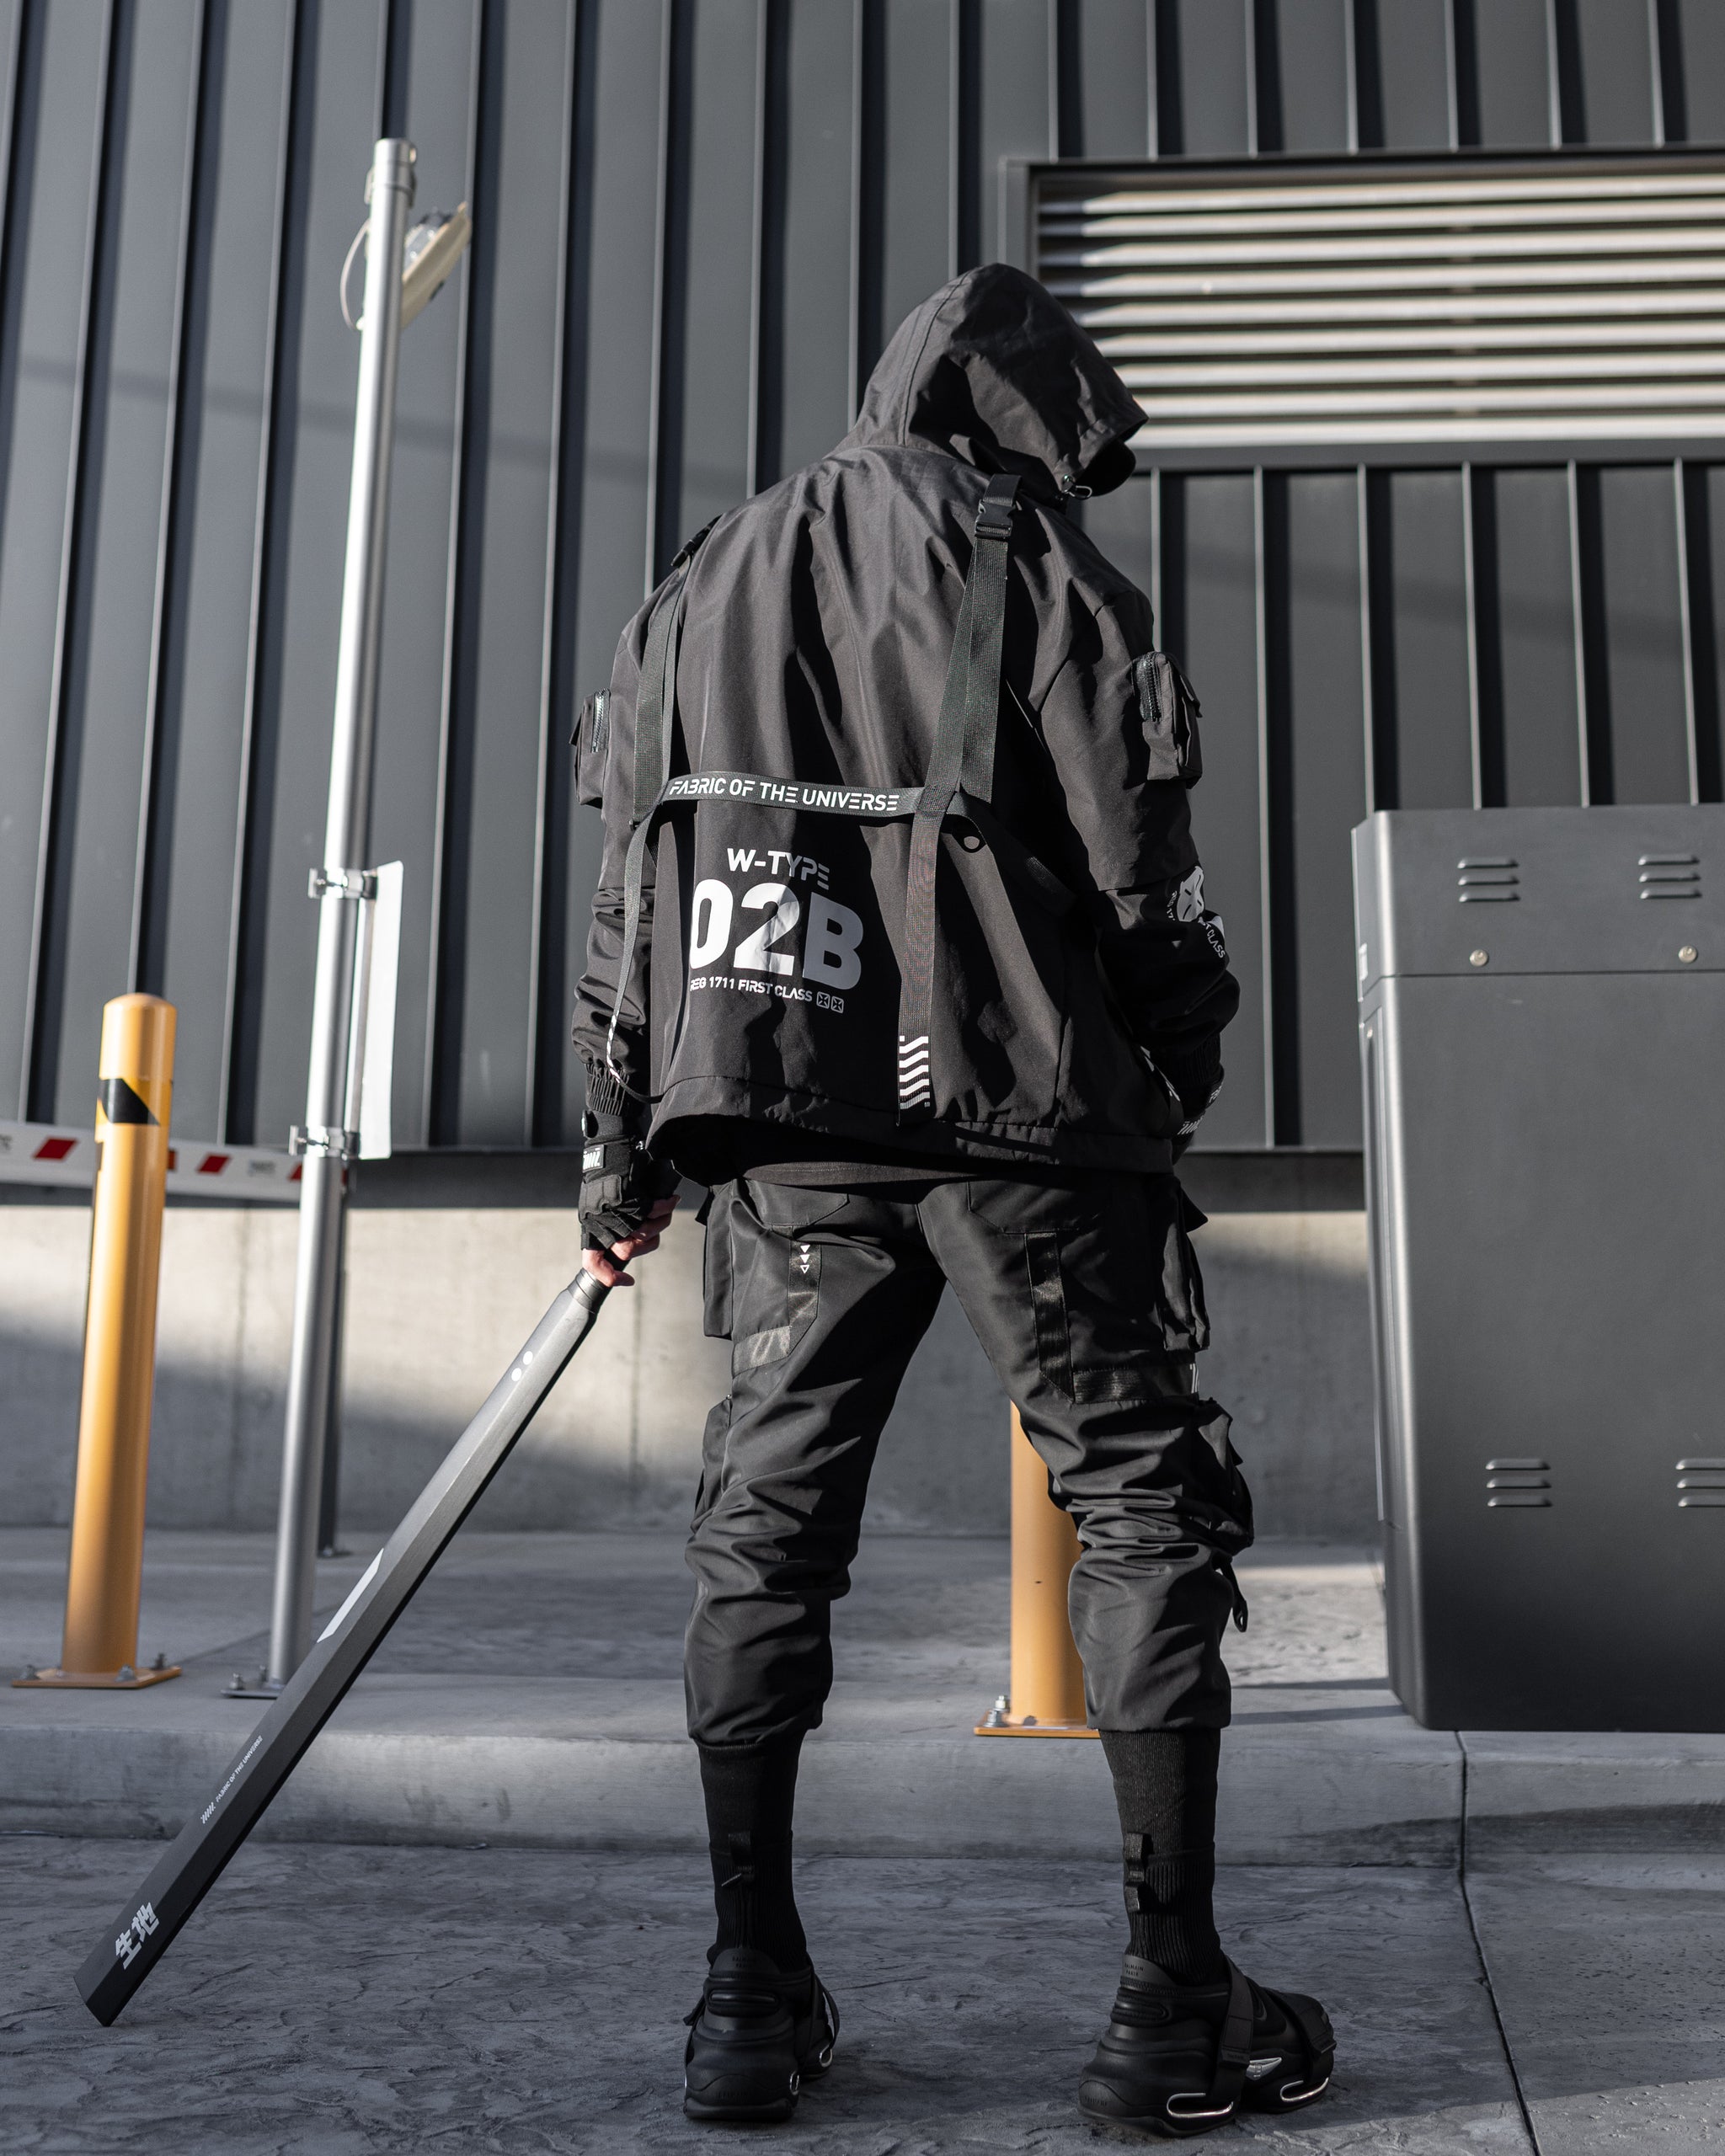 Fabric of the Universe® on Instagram: CG-Type 12X Pants are available New  windbreakers ETA end of June New chest bag update coming soon . . .  #fabricoftheuniverse #techwear #streetwear #cyberpunk #futureculture #fyp #